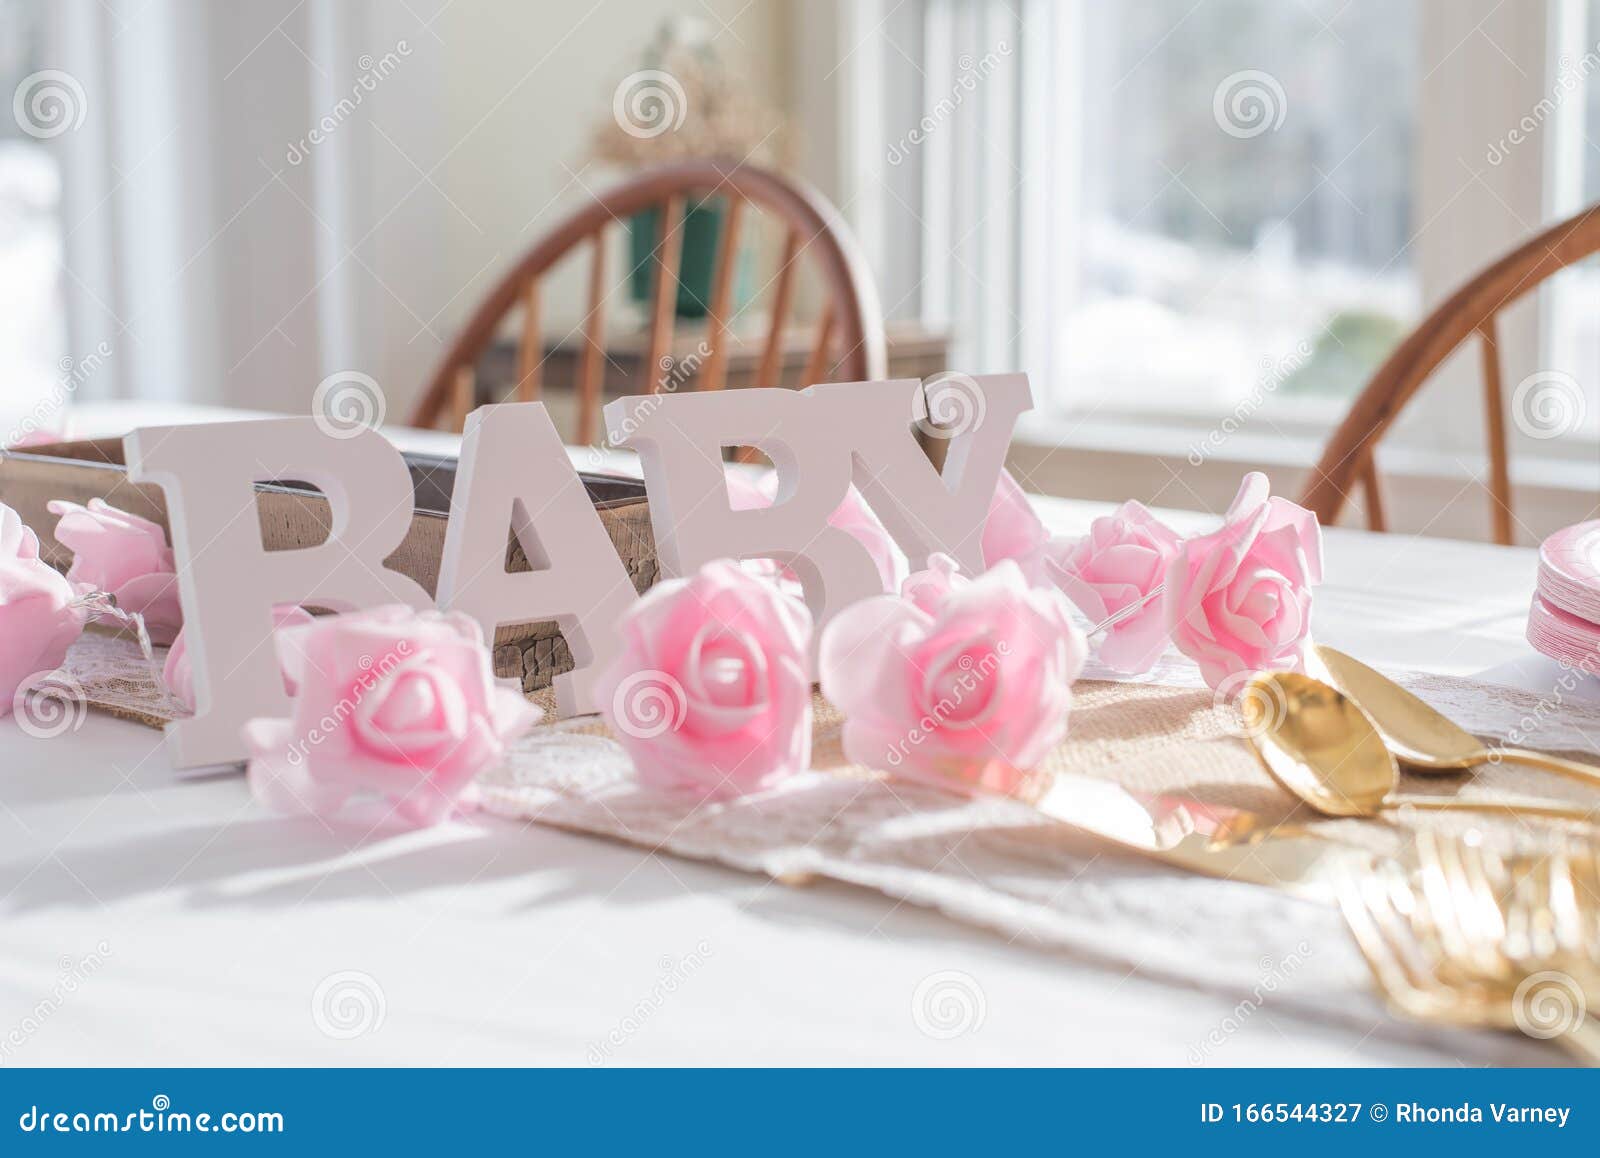 Shabby Chic Pink Baby Shower Decorations On Table Stock Image Image Of Gift